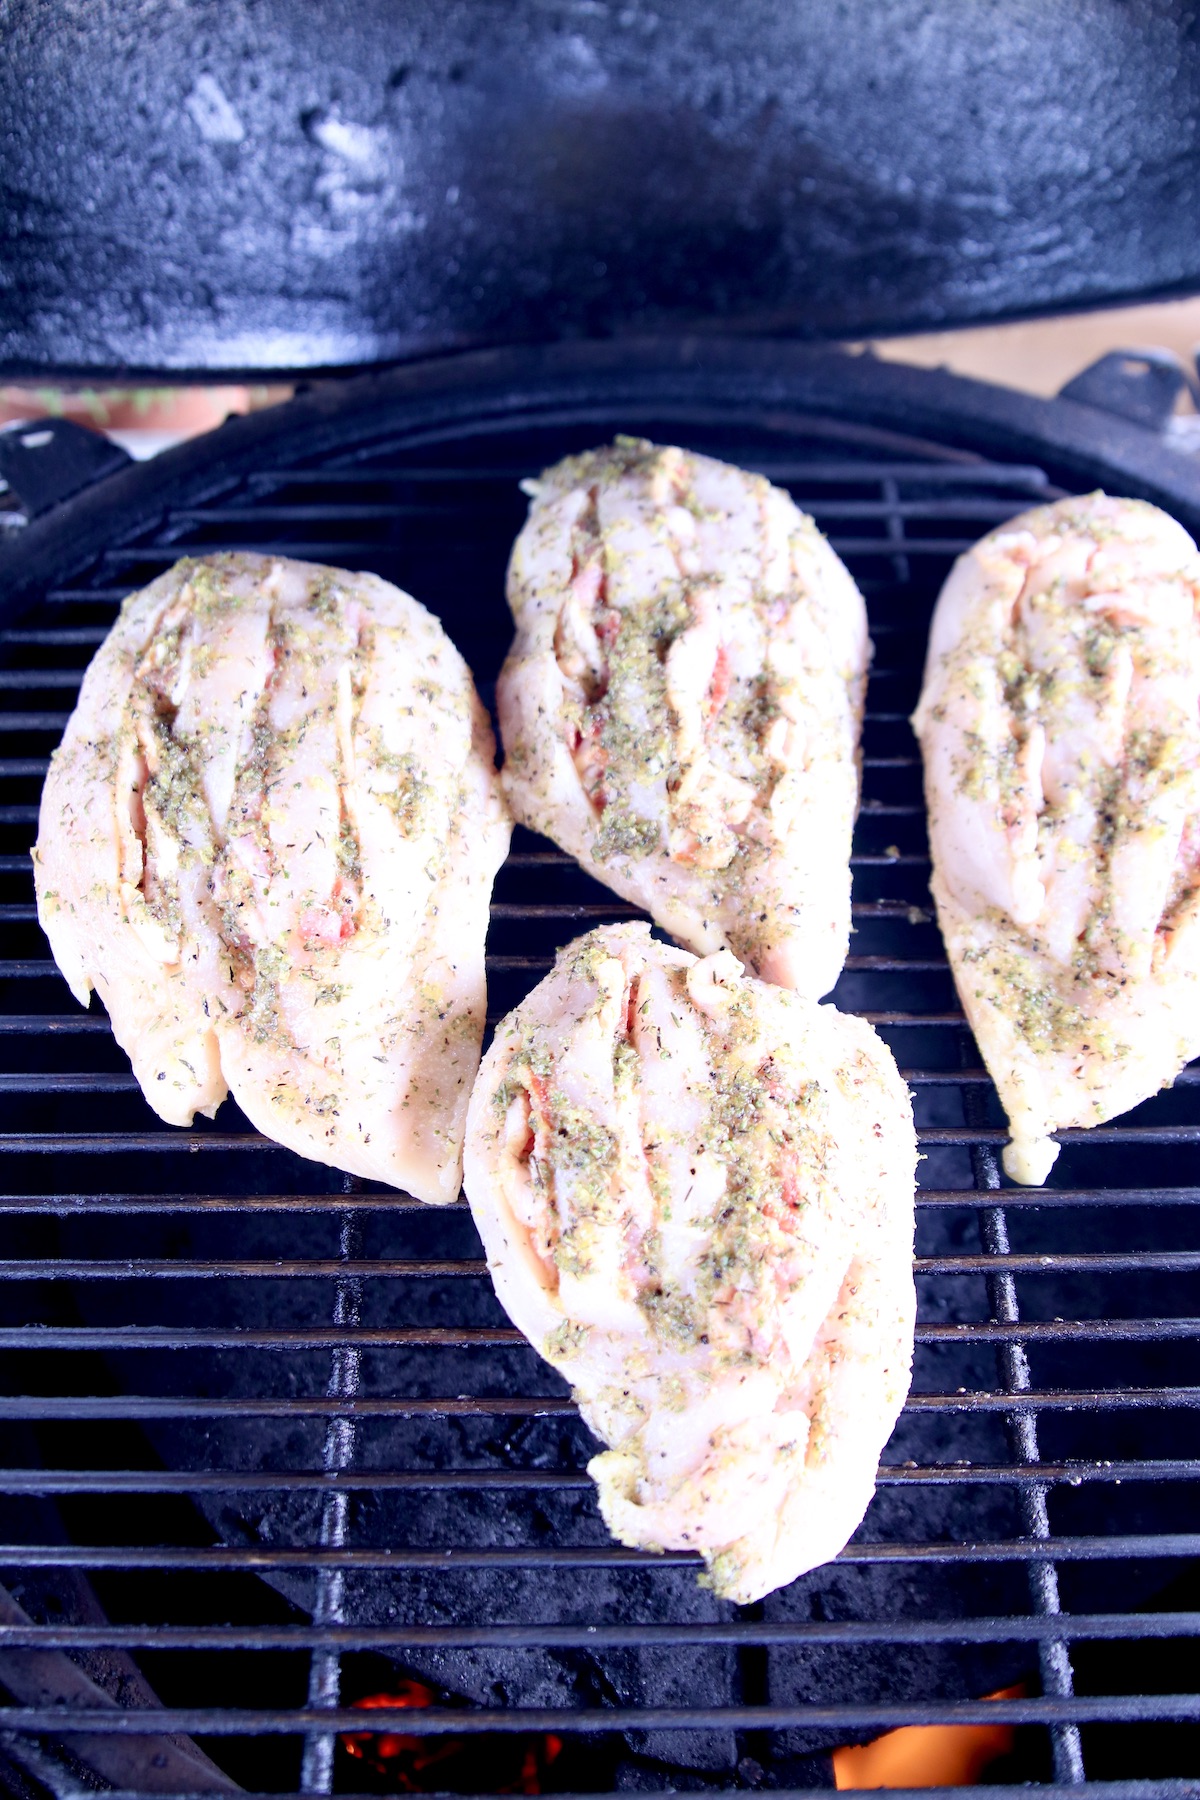 4 large chicken breasts on a grill